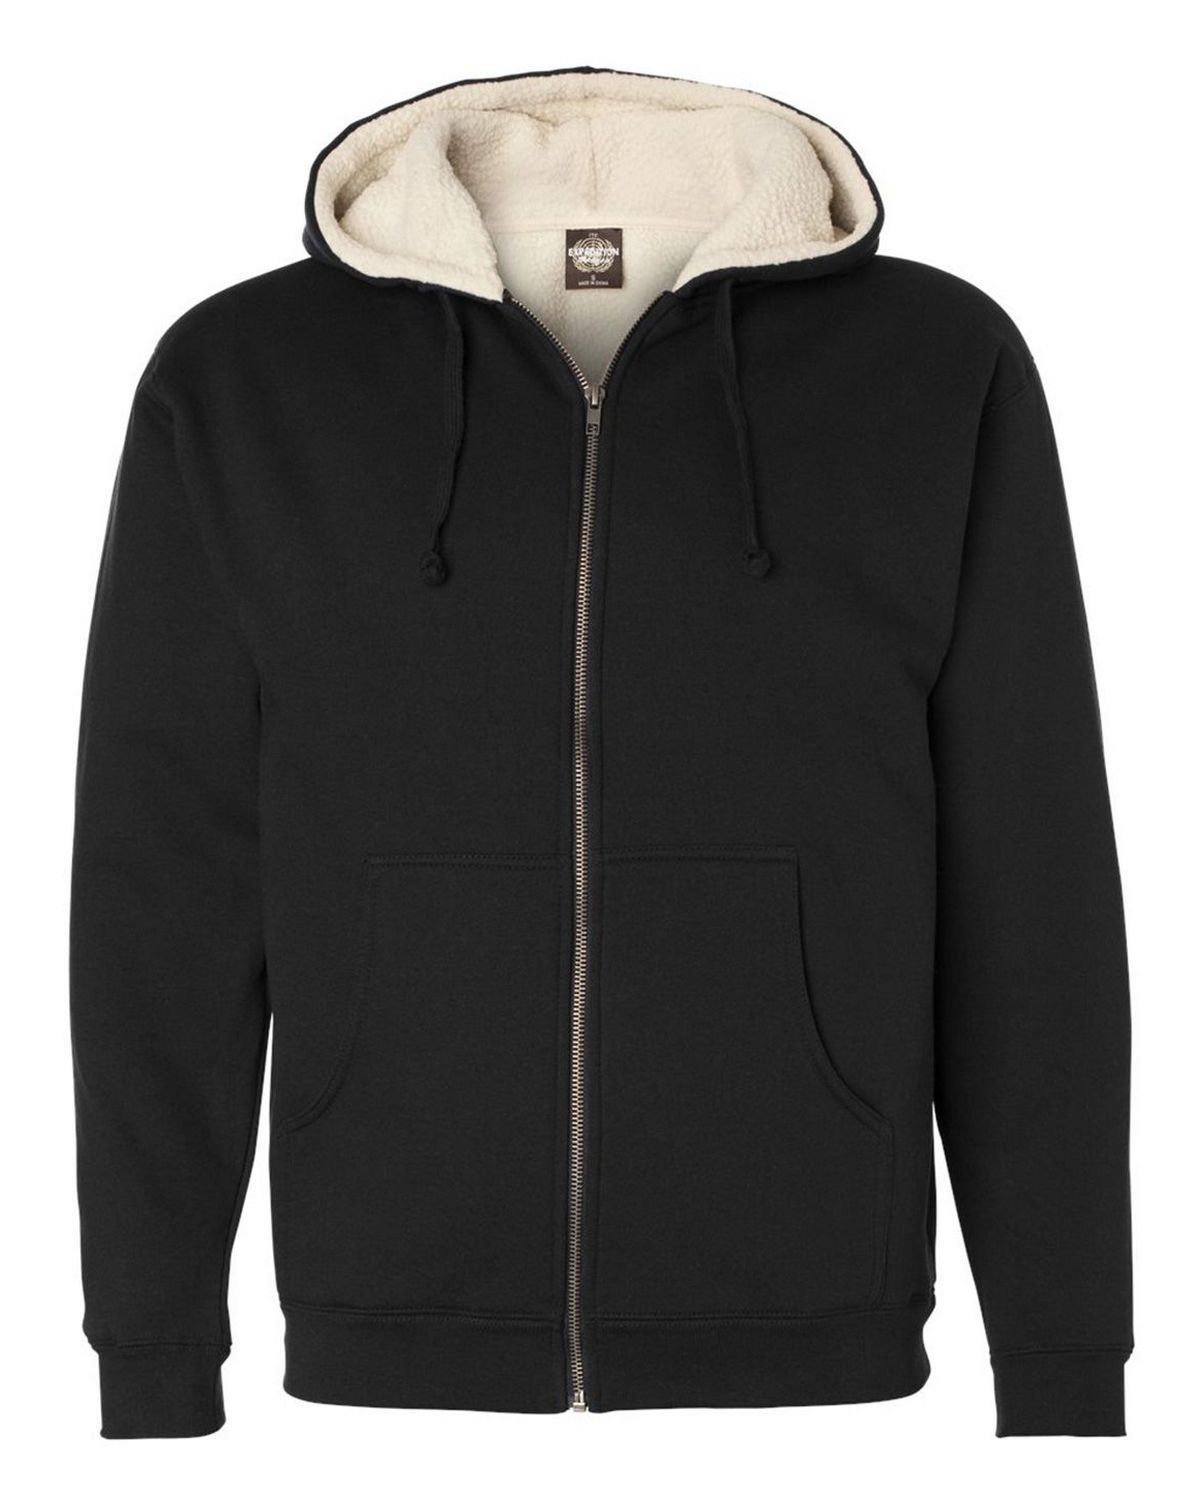 Independent Trading Co. EXP40SHZ Men's Sherpa Lined Full-Zip Hooded Sweatshirt